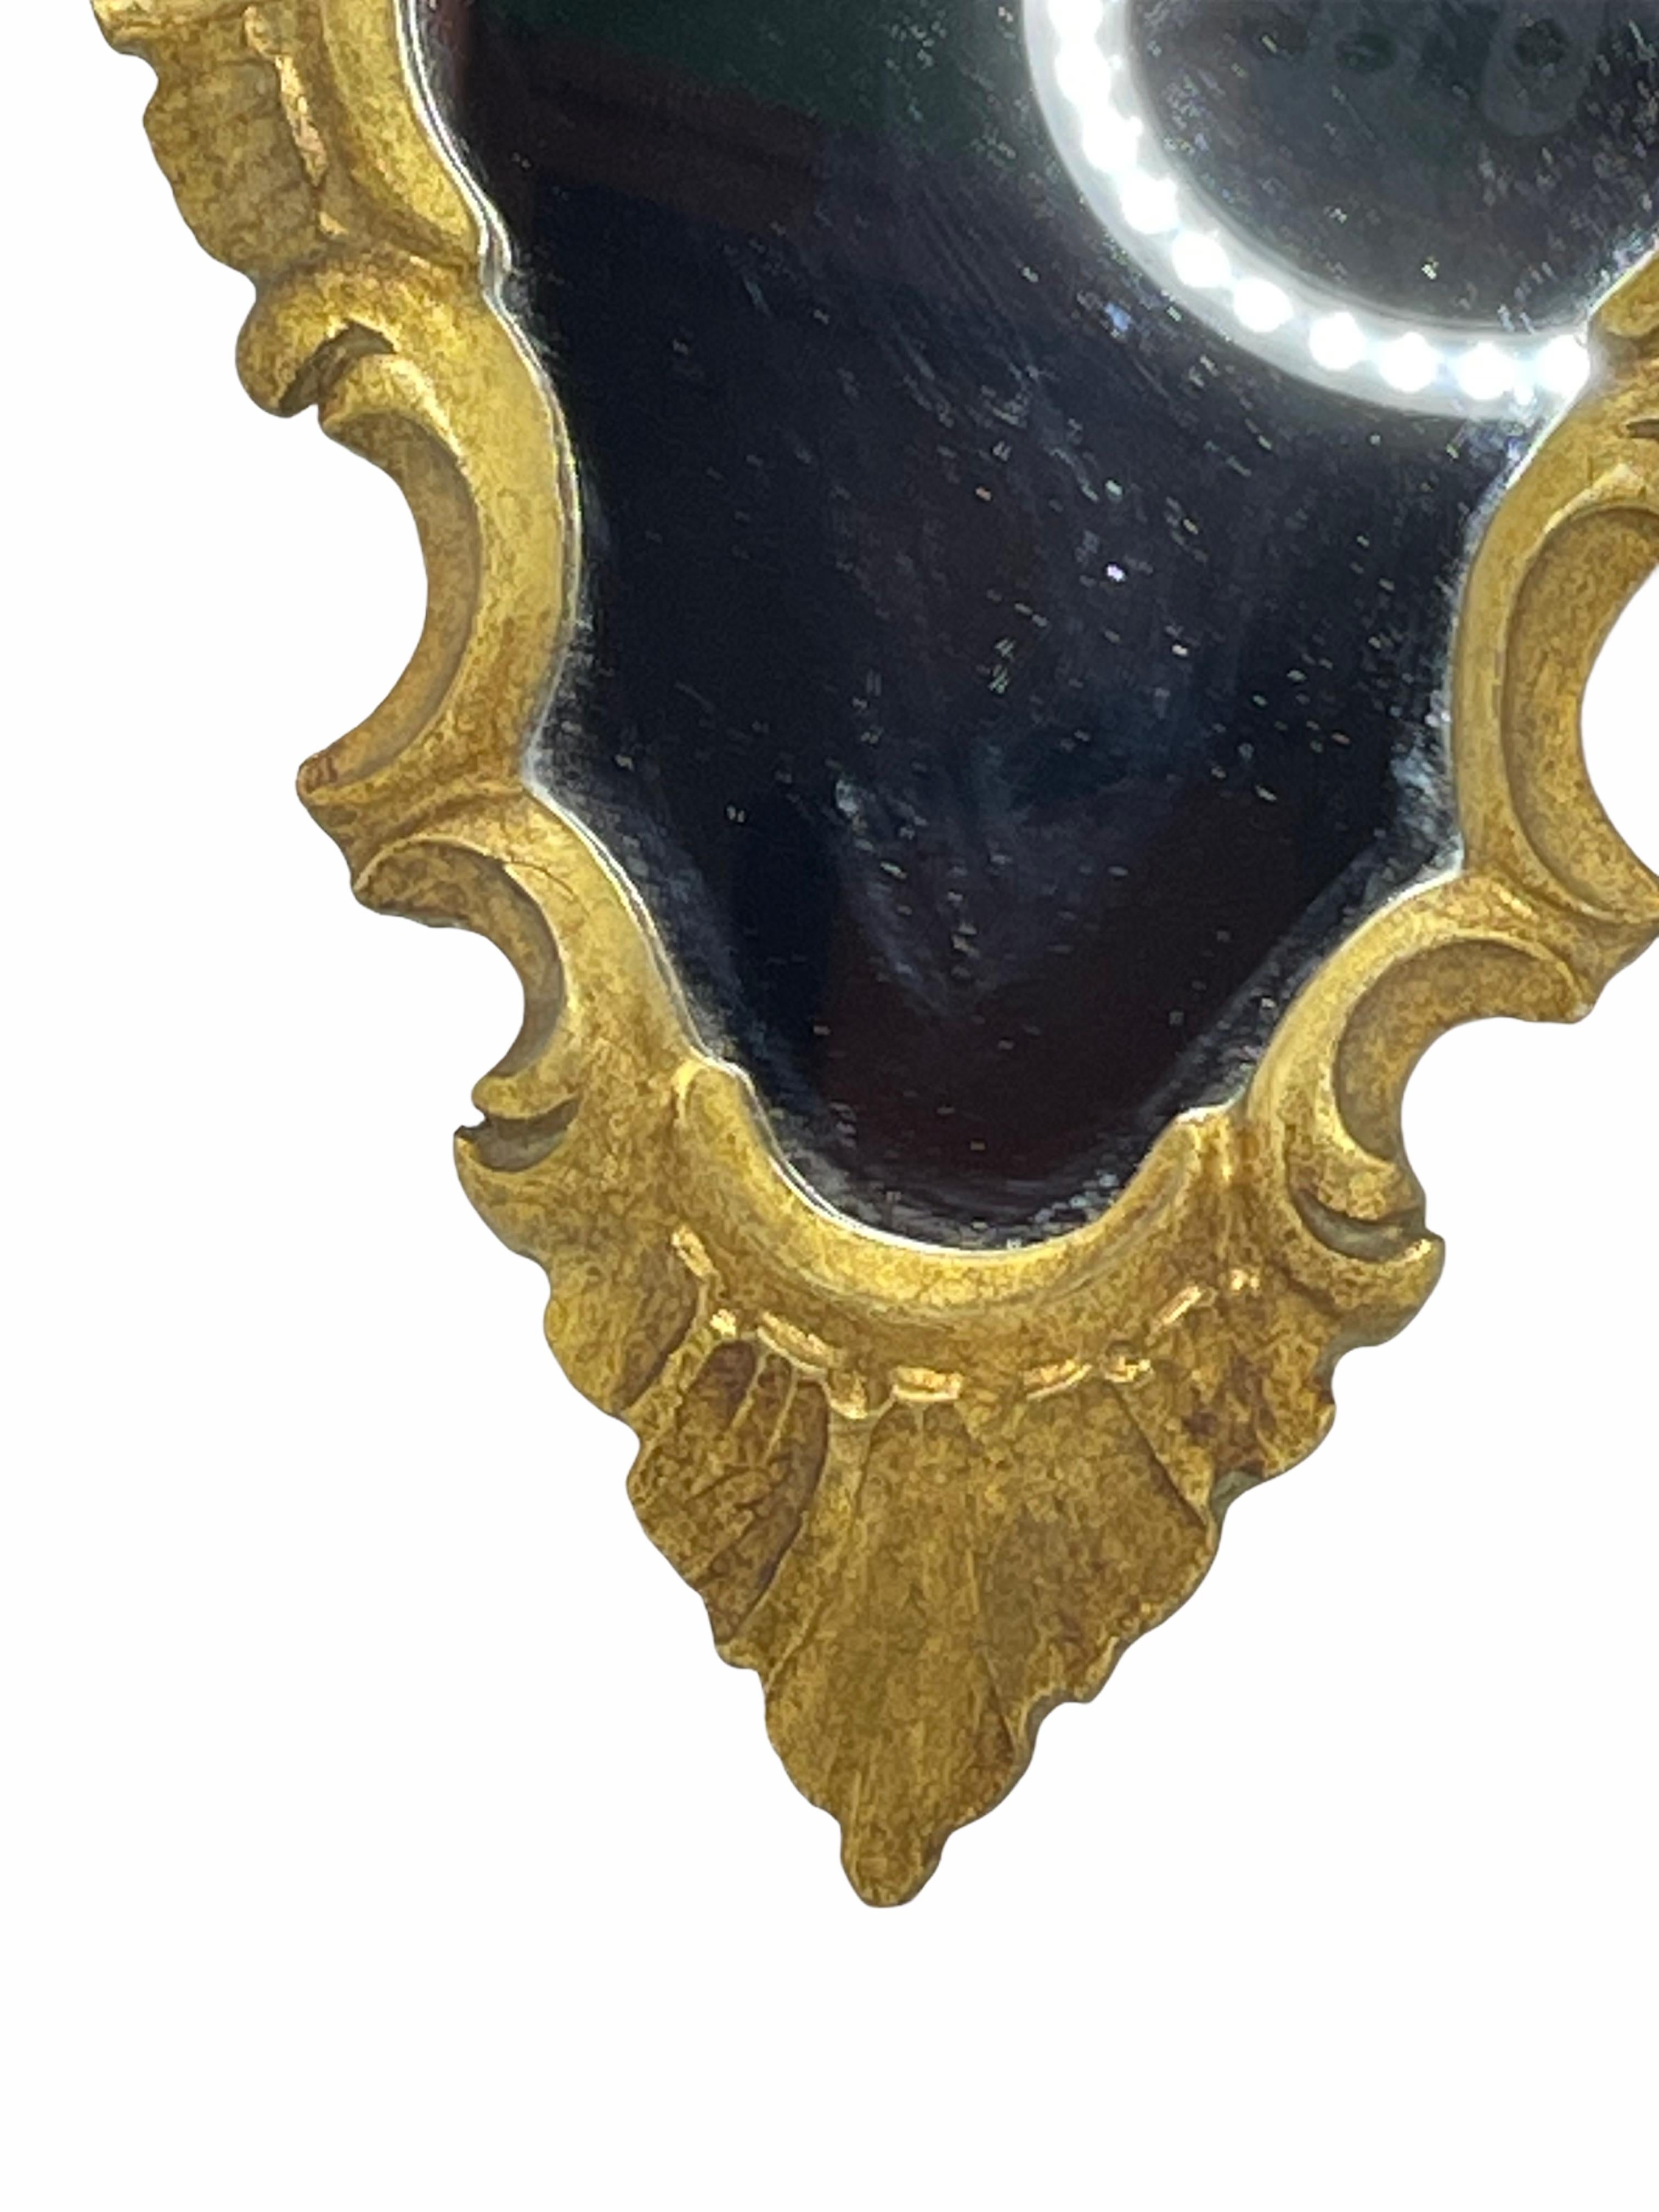 Stunning Hollywood Regency style toleware mirror. The gilt frame surrounds a glass mirror. Made in Italy, circa 1960s. Beautiful small mirror for any room. Nice addition to any room.